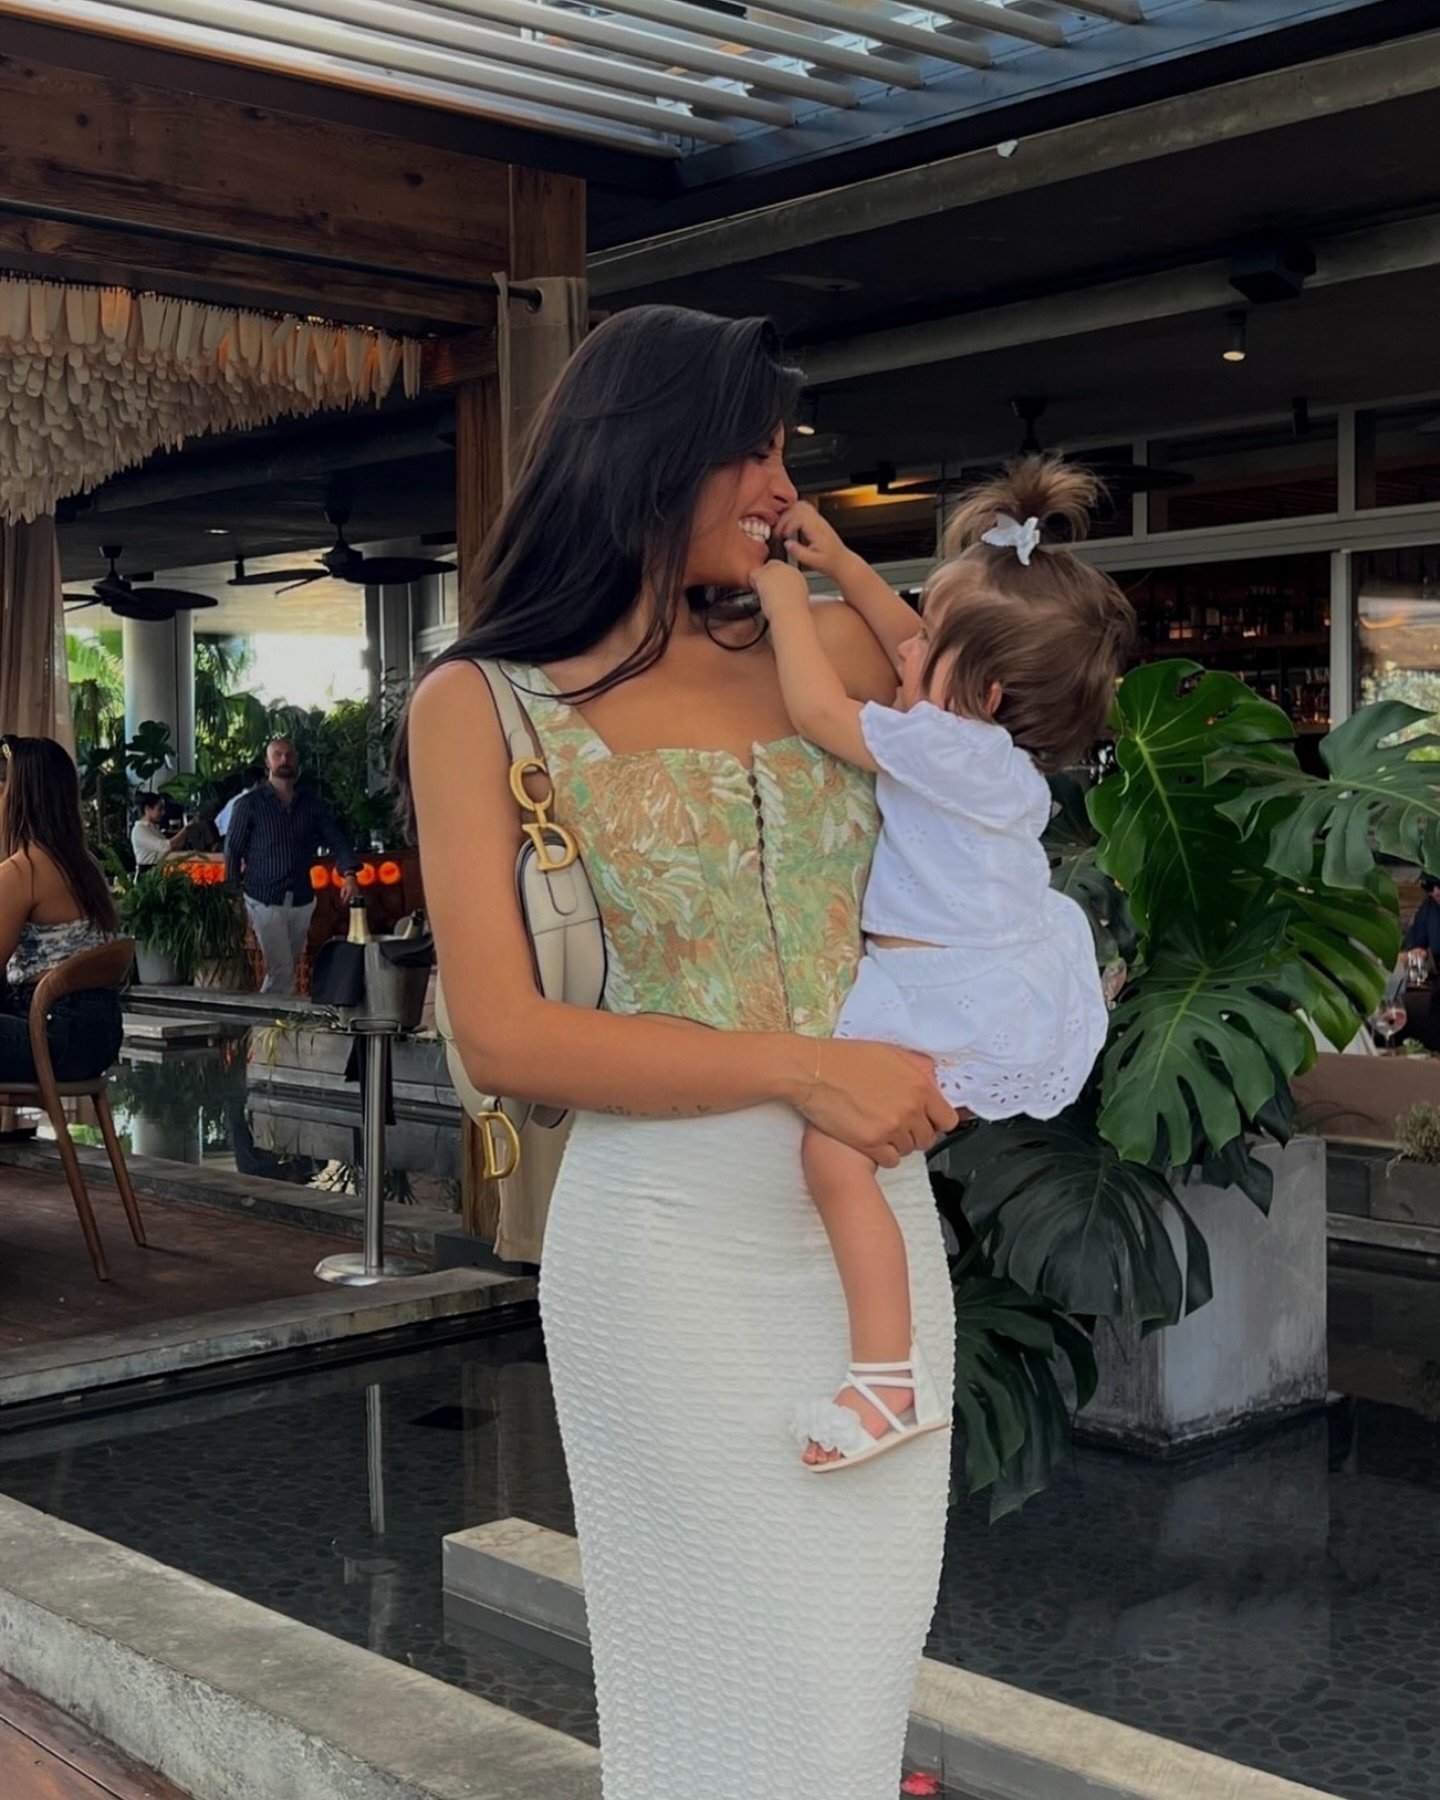 Happy Mother&rsquo;s Day to all the mothers that shape our lives with love and grace. We look forward to celebrating you today at #MILArestaurant 
📷: @savannahriveraaa